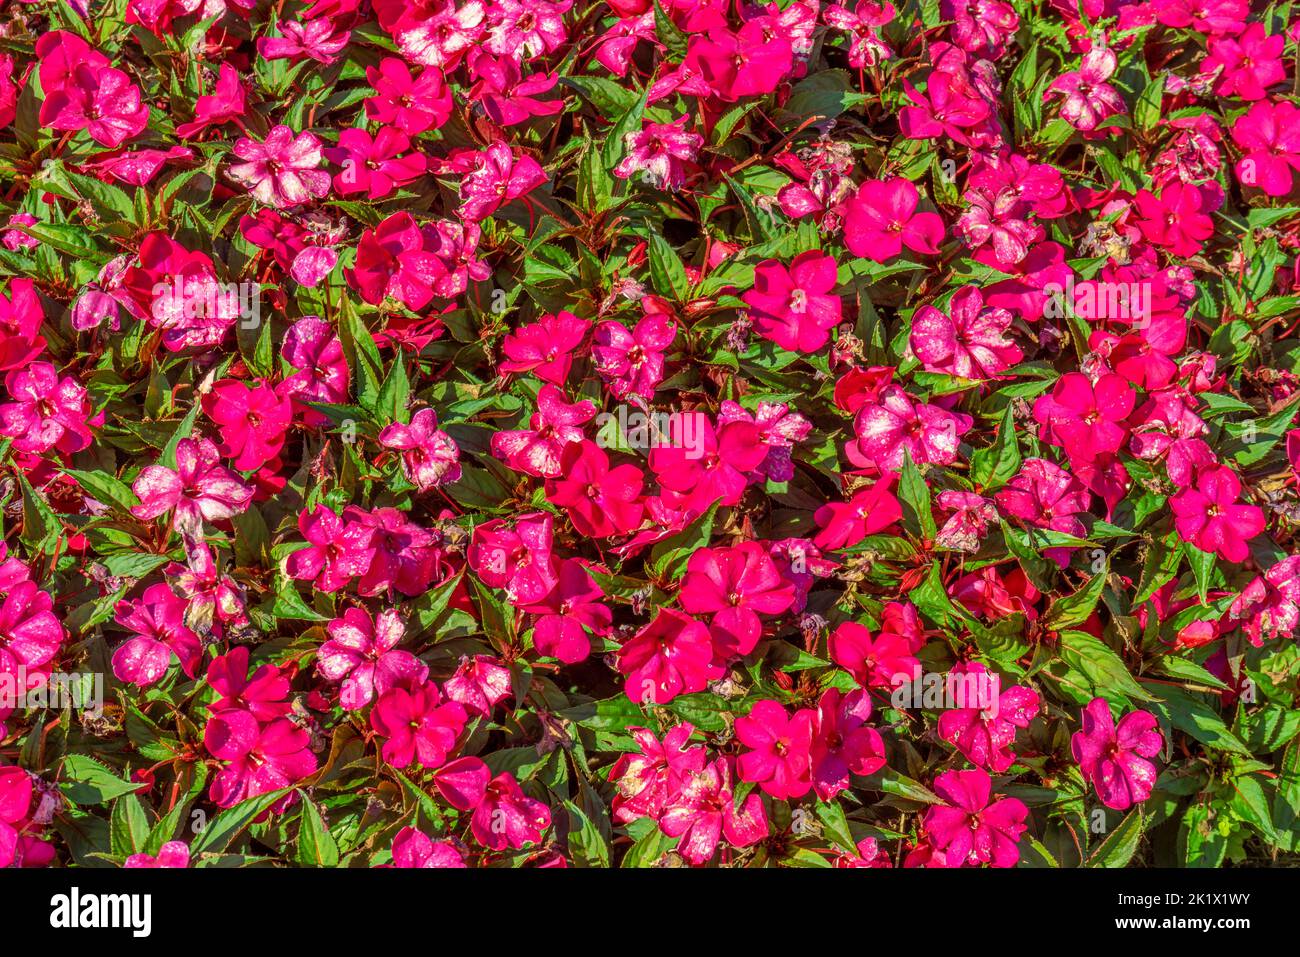 Lots of flowering New Guinea impatiens flowers in sunny ambiance Stock Photo